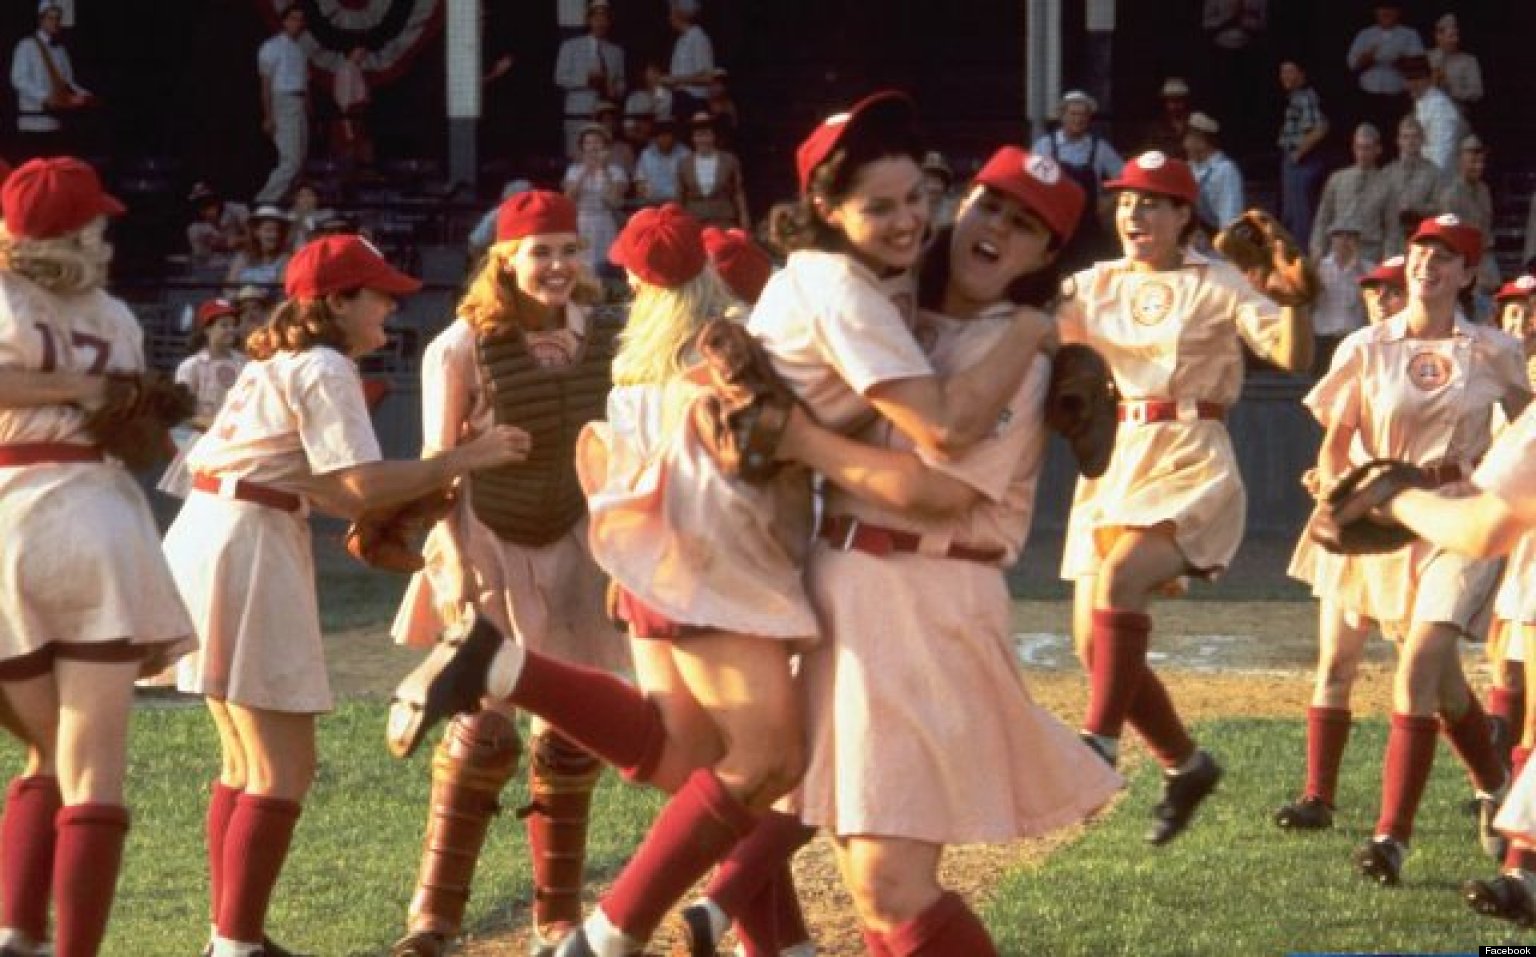 A League of Their Own' Cast Reunited To Play One More Time